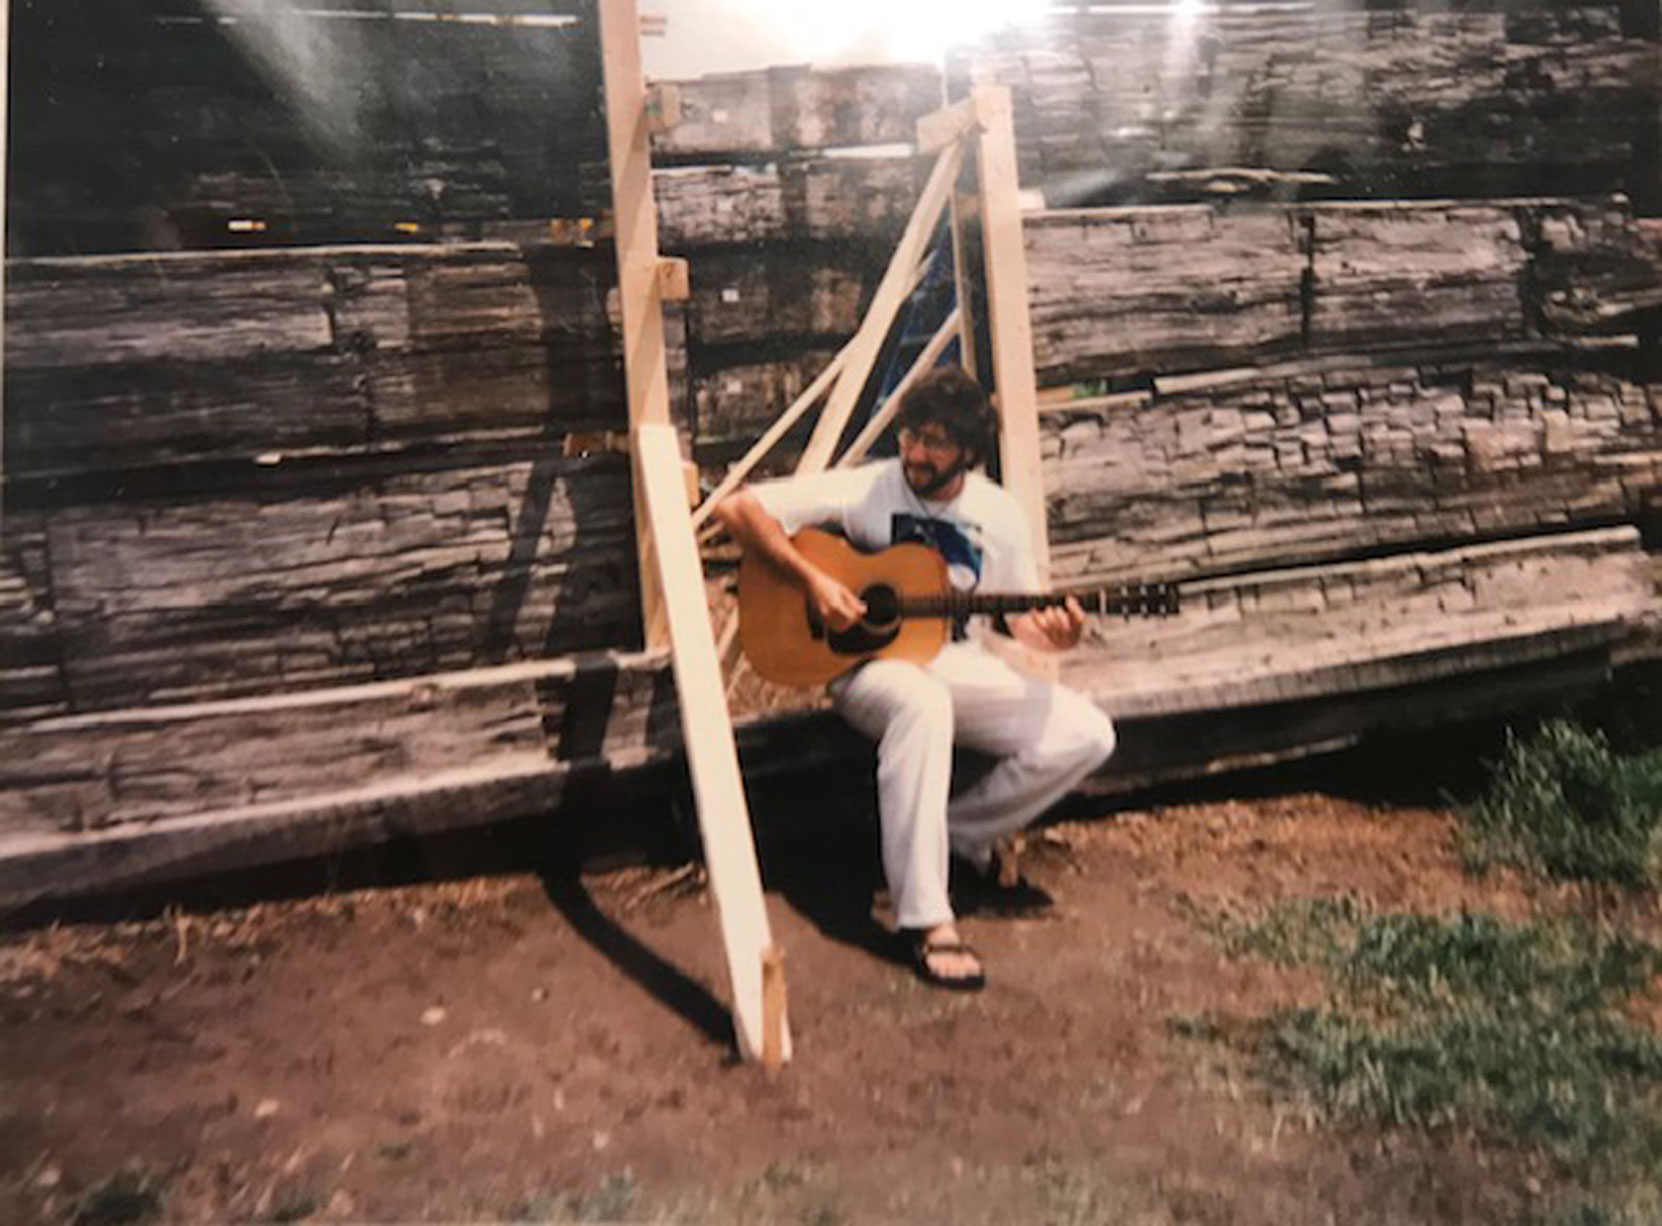 Larry Amato at the Muddy Waters cabin as it was being disassembled at Stovall Farms for its move to the Blues Museum, , Clarksdale, Mississippi, circa 1990's (photo: Larry Amato)